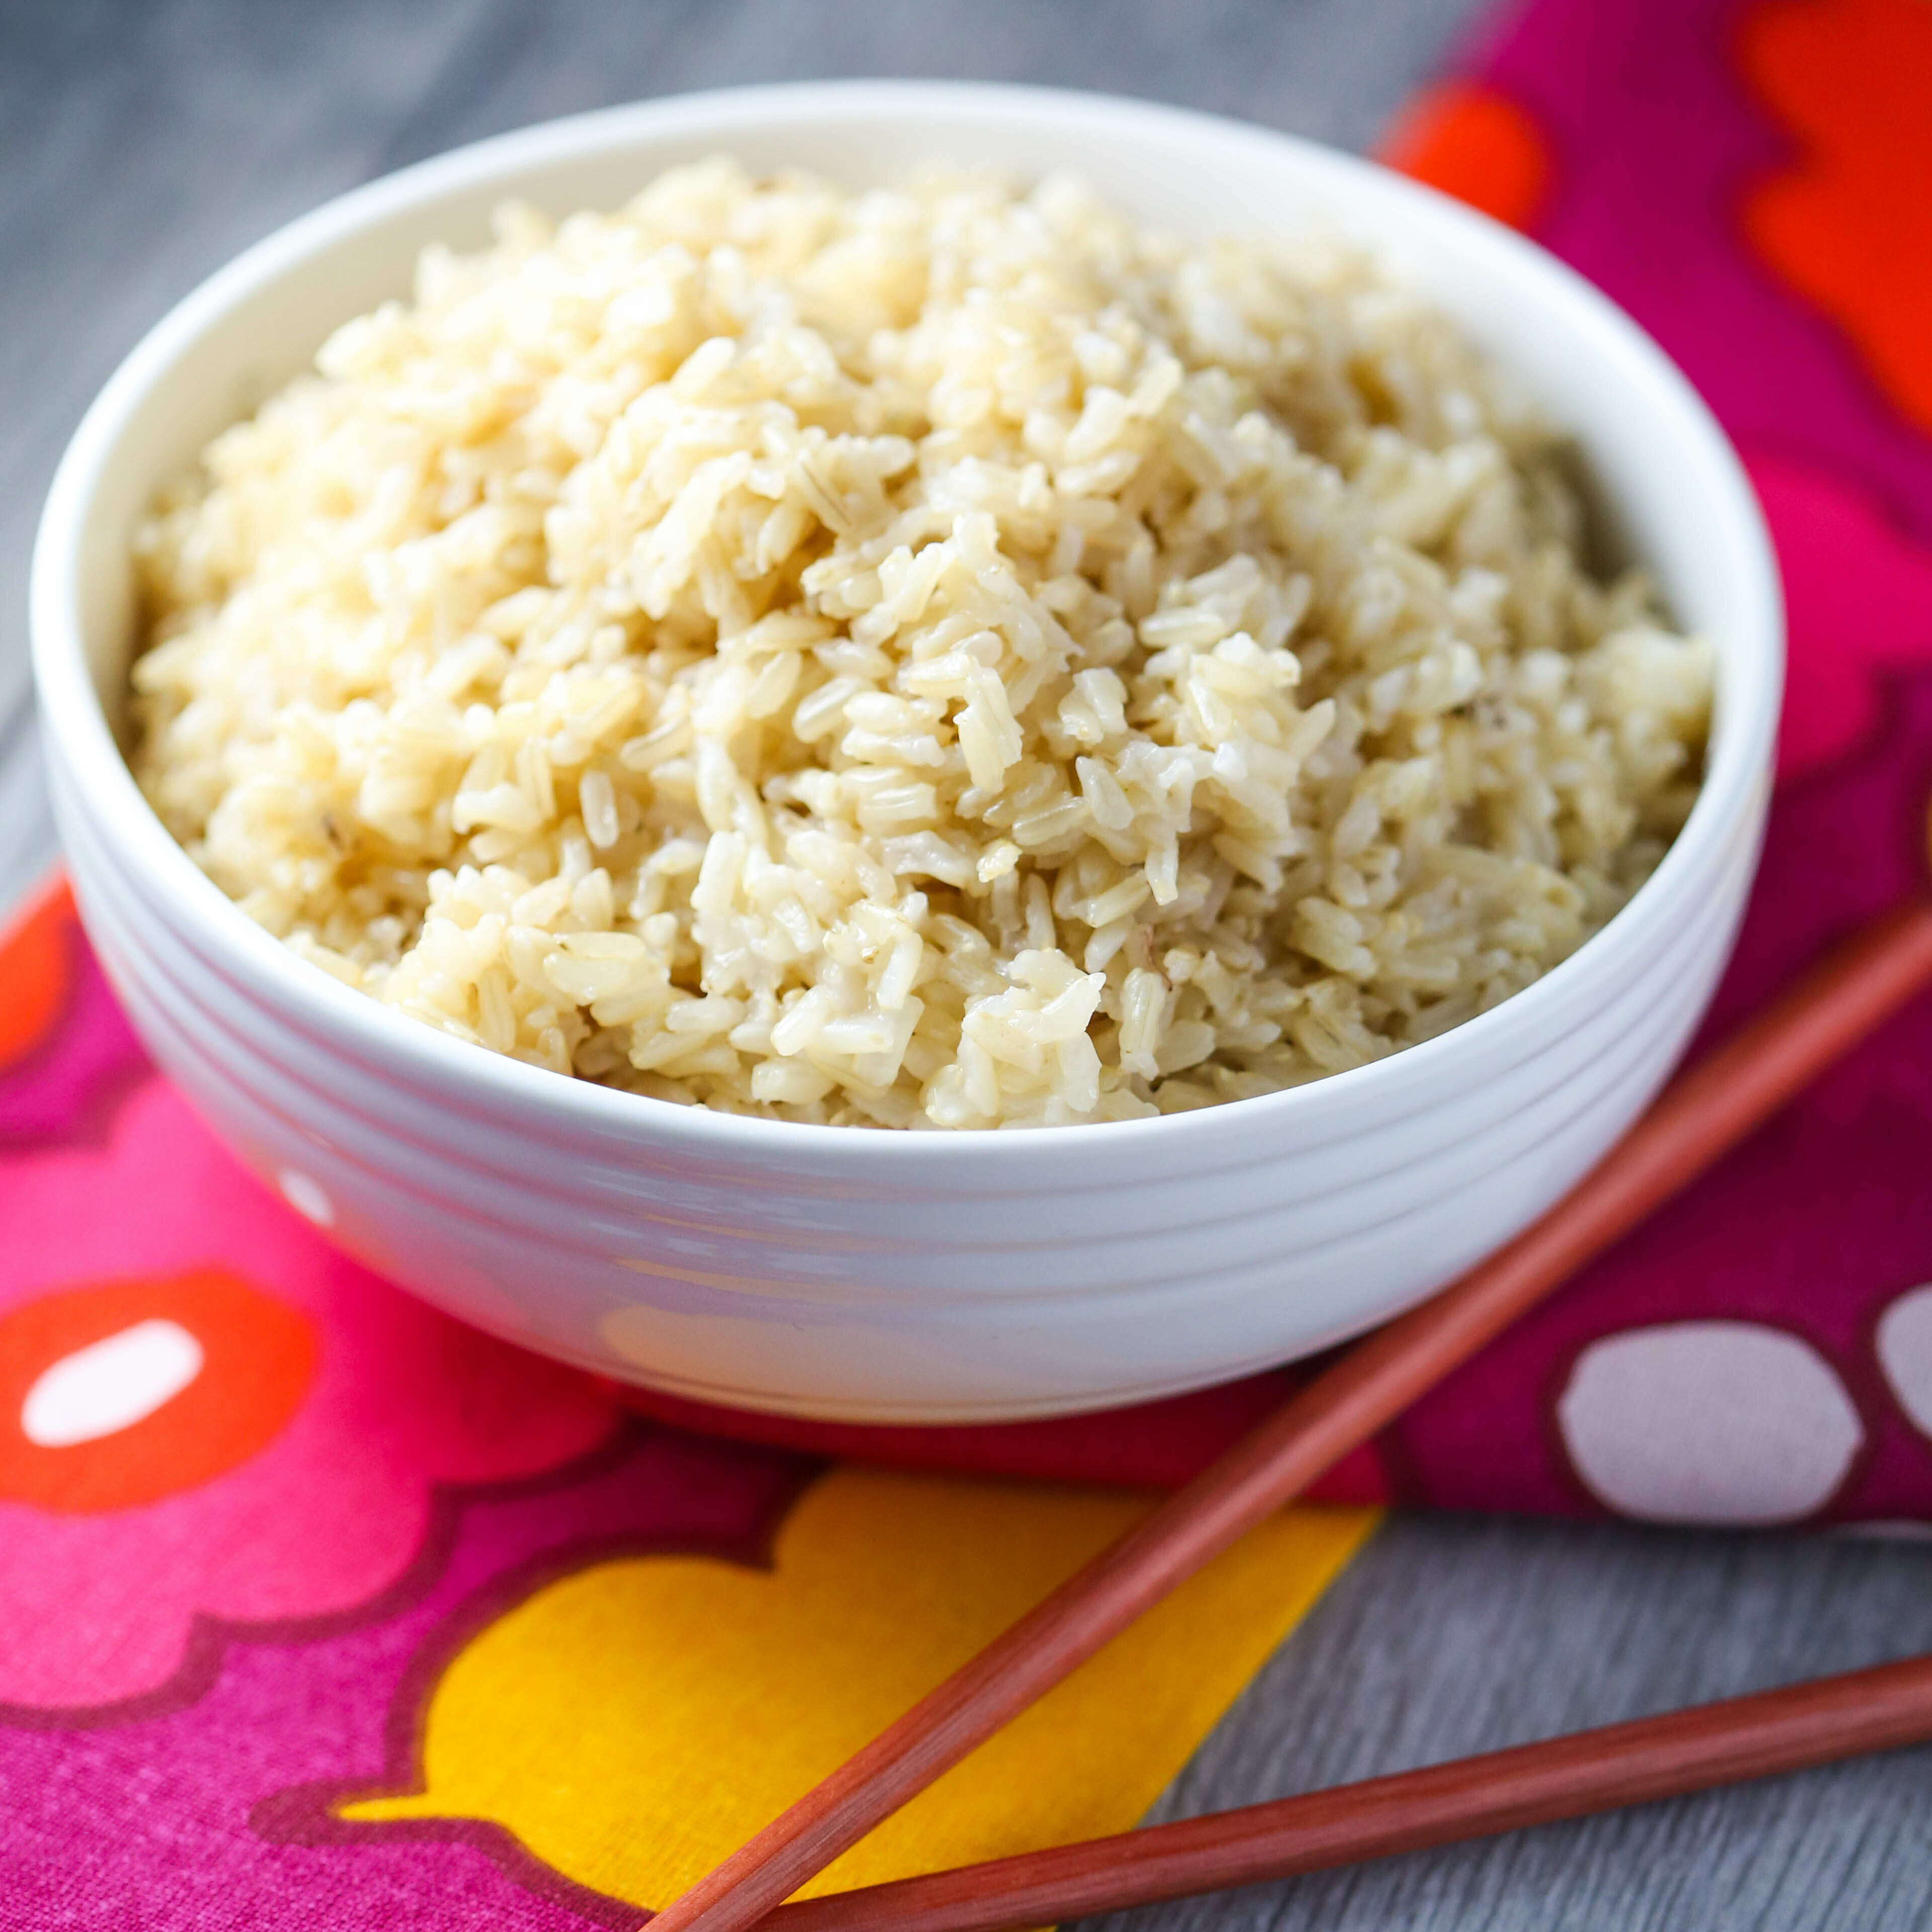 Cooking Brown Rice In Instant Pot
 How to make Brown Rice in the Instant Pot